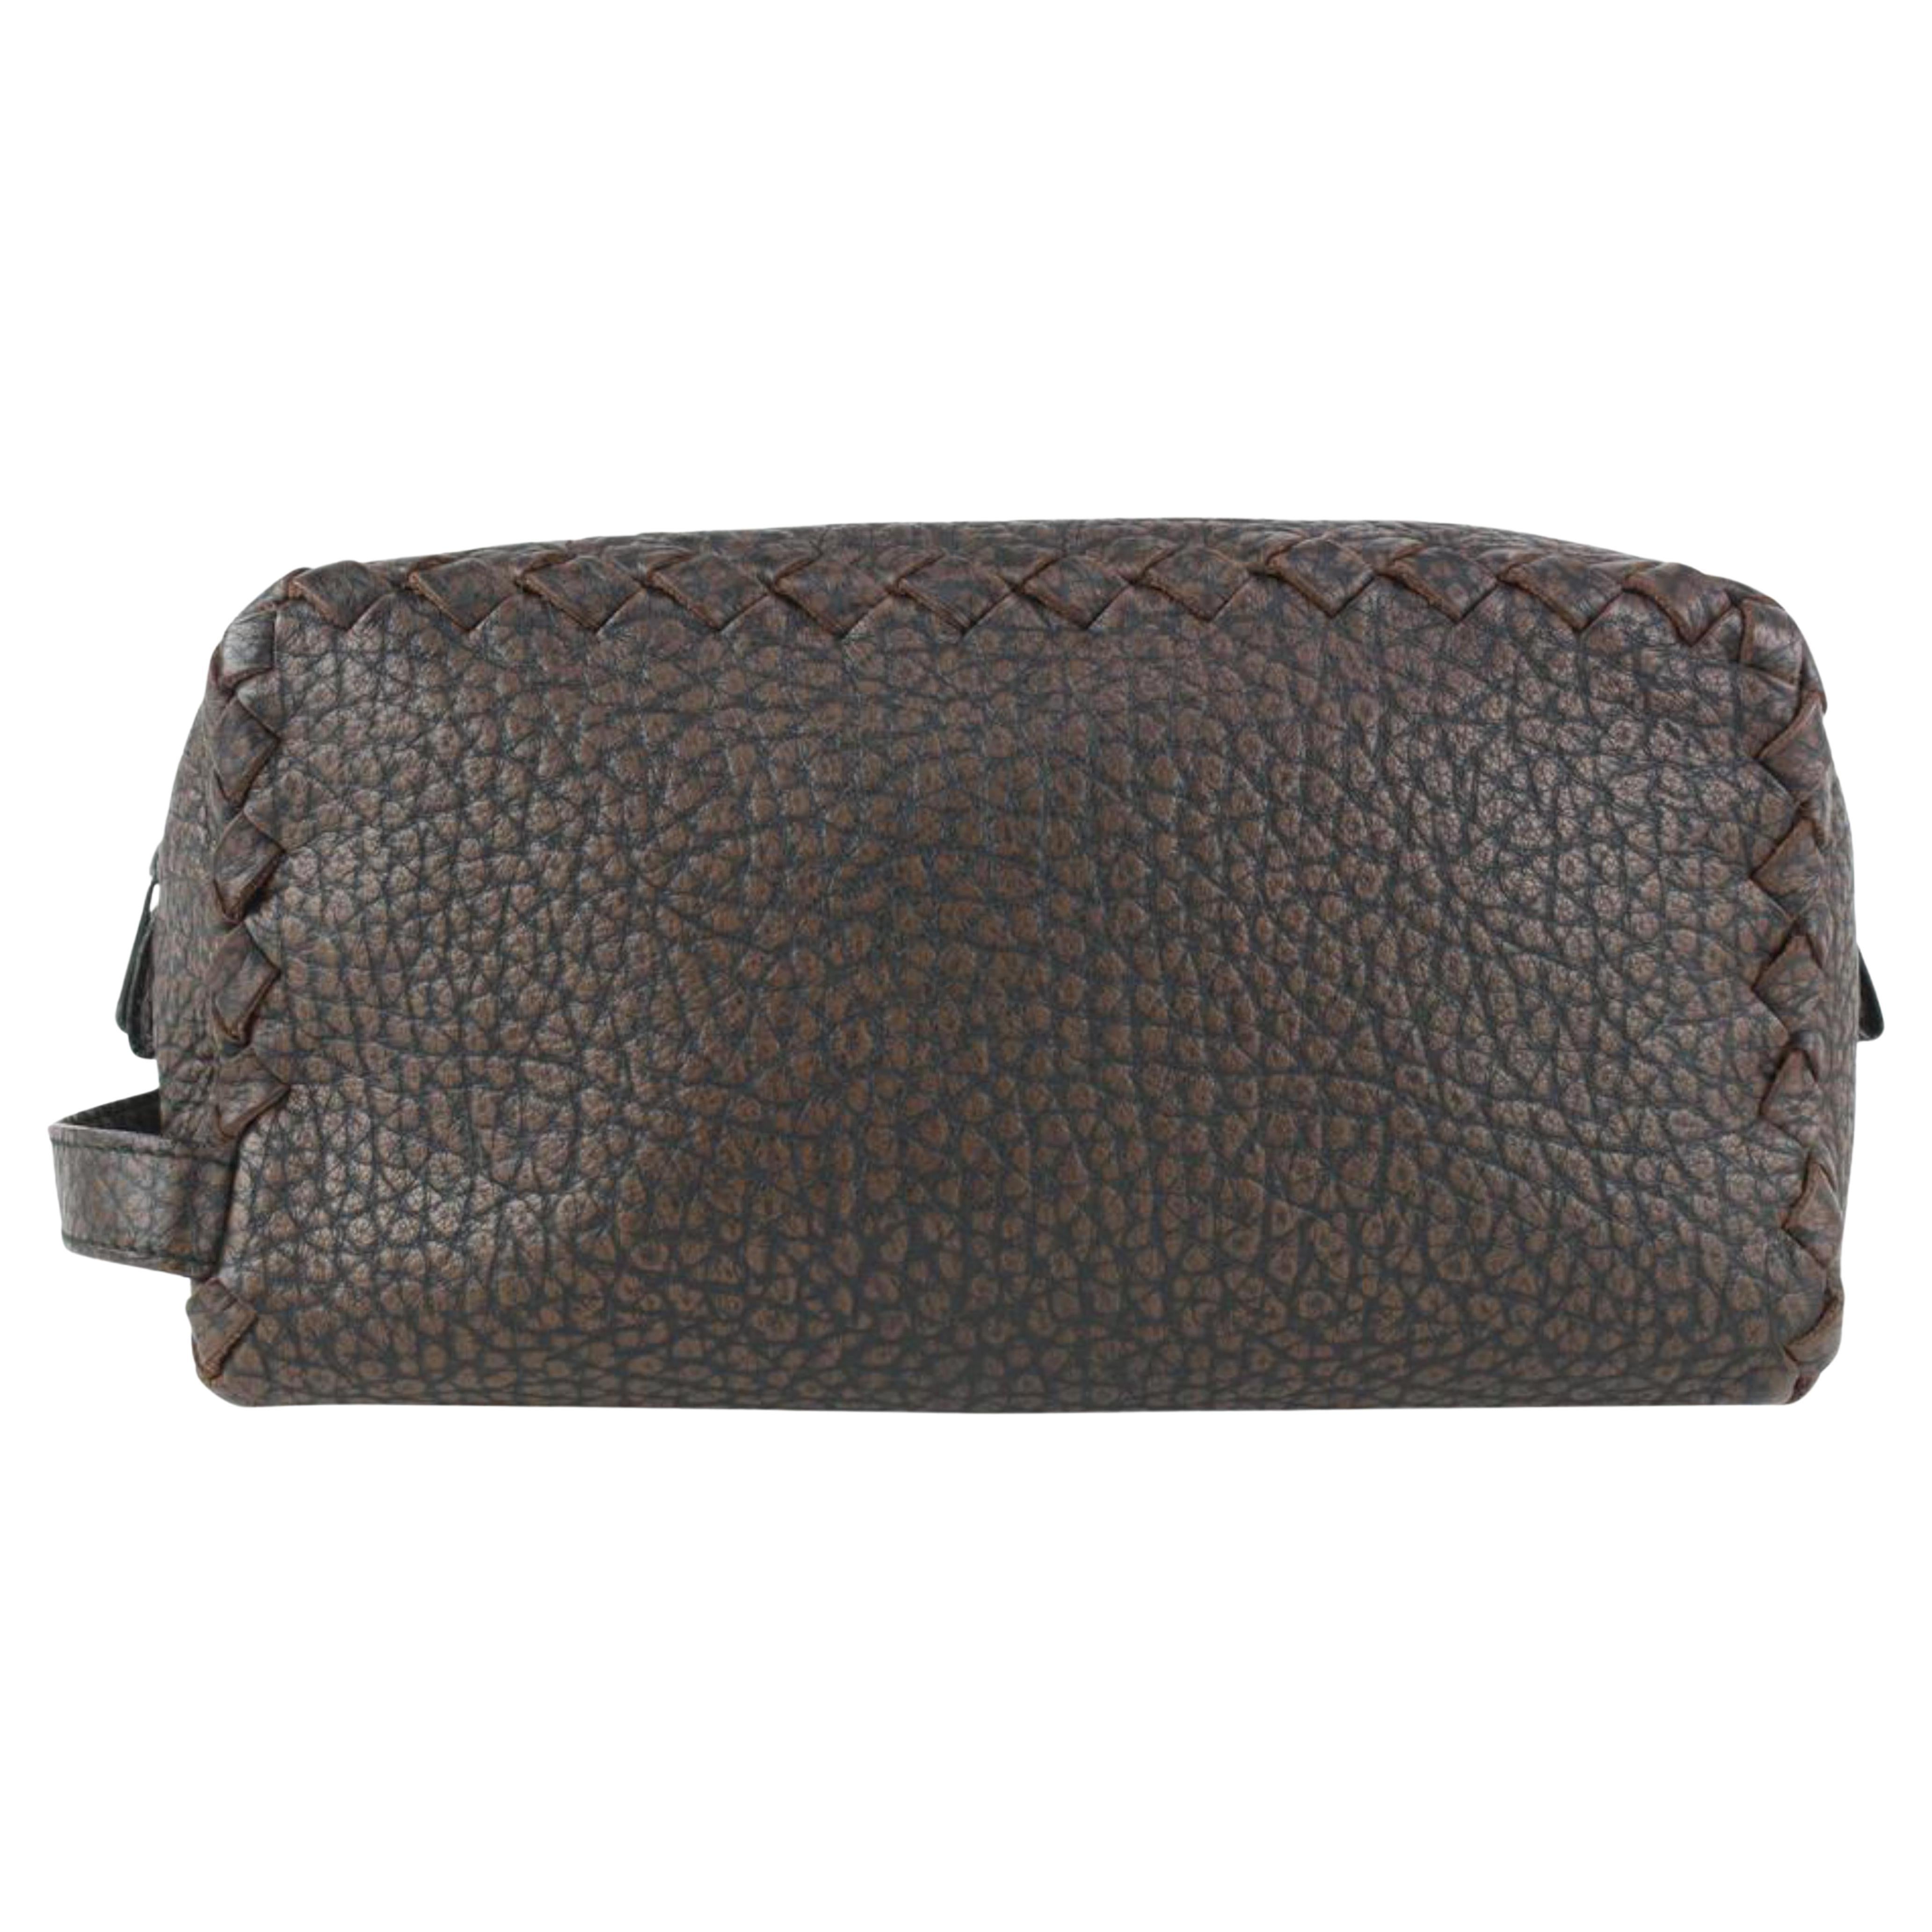 Bottega Veneta Brown Leather Cosmetic Pouch Toiletry Case 927bot37 For Sale